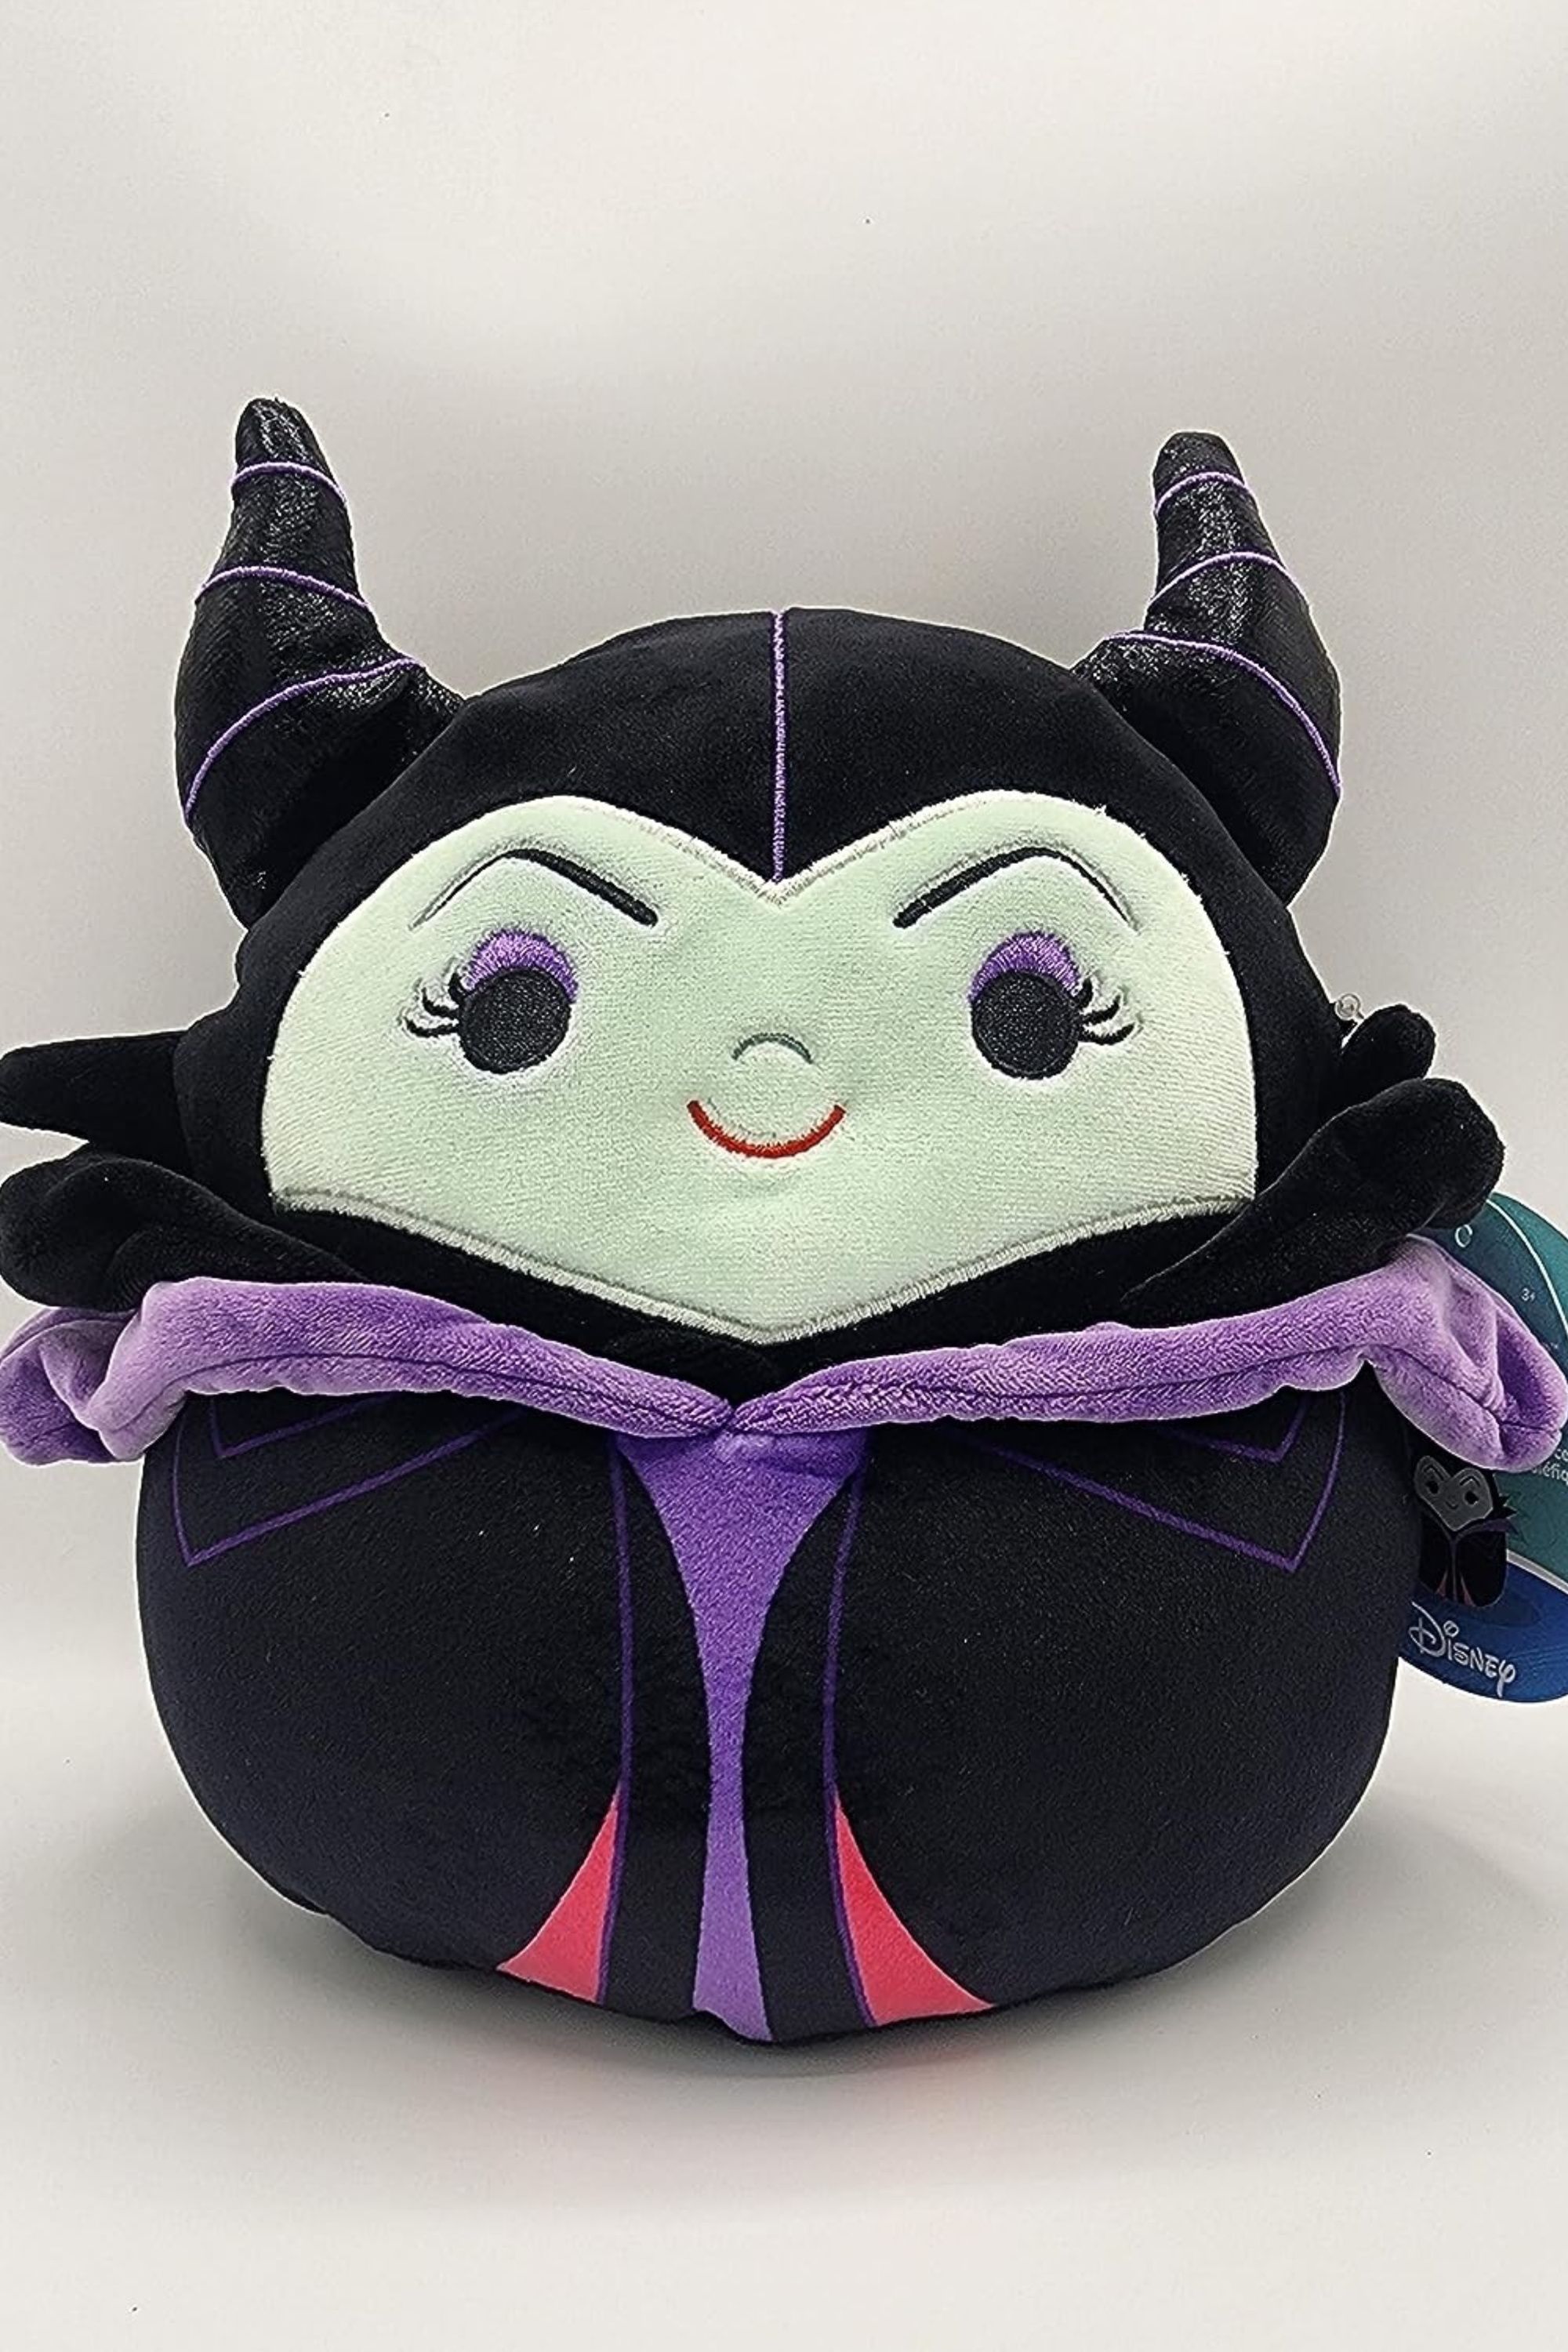 Squishmallows x Disney - 24+ Plush Options to Choose from